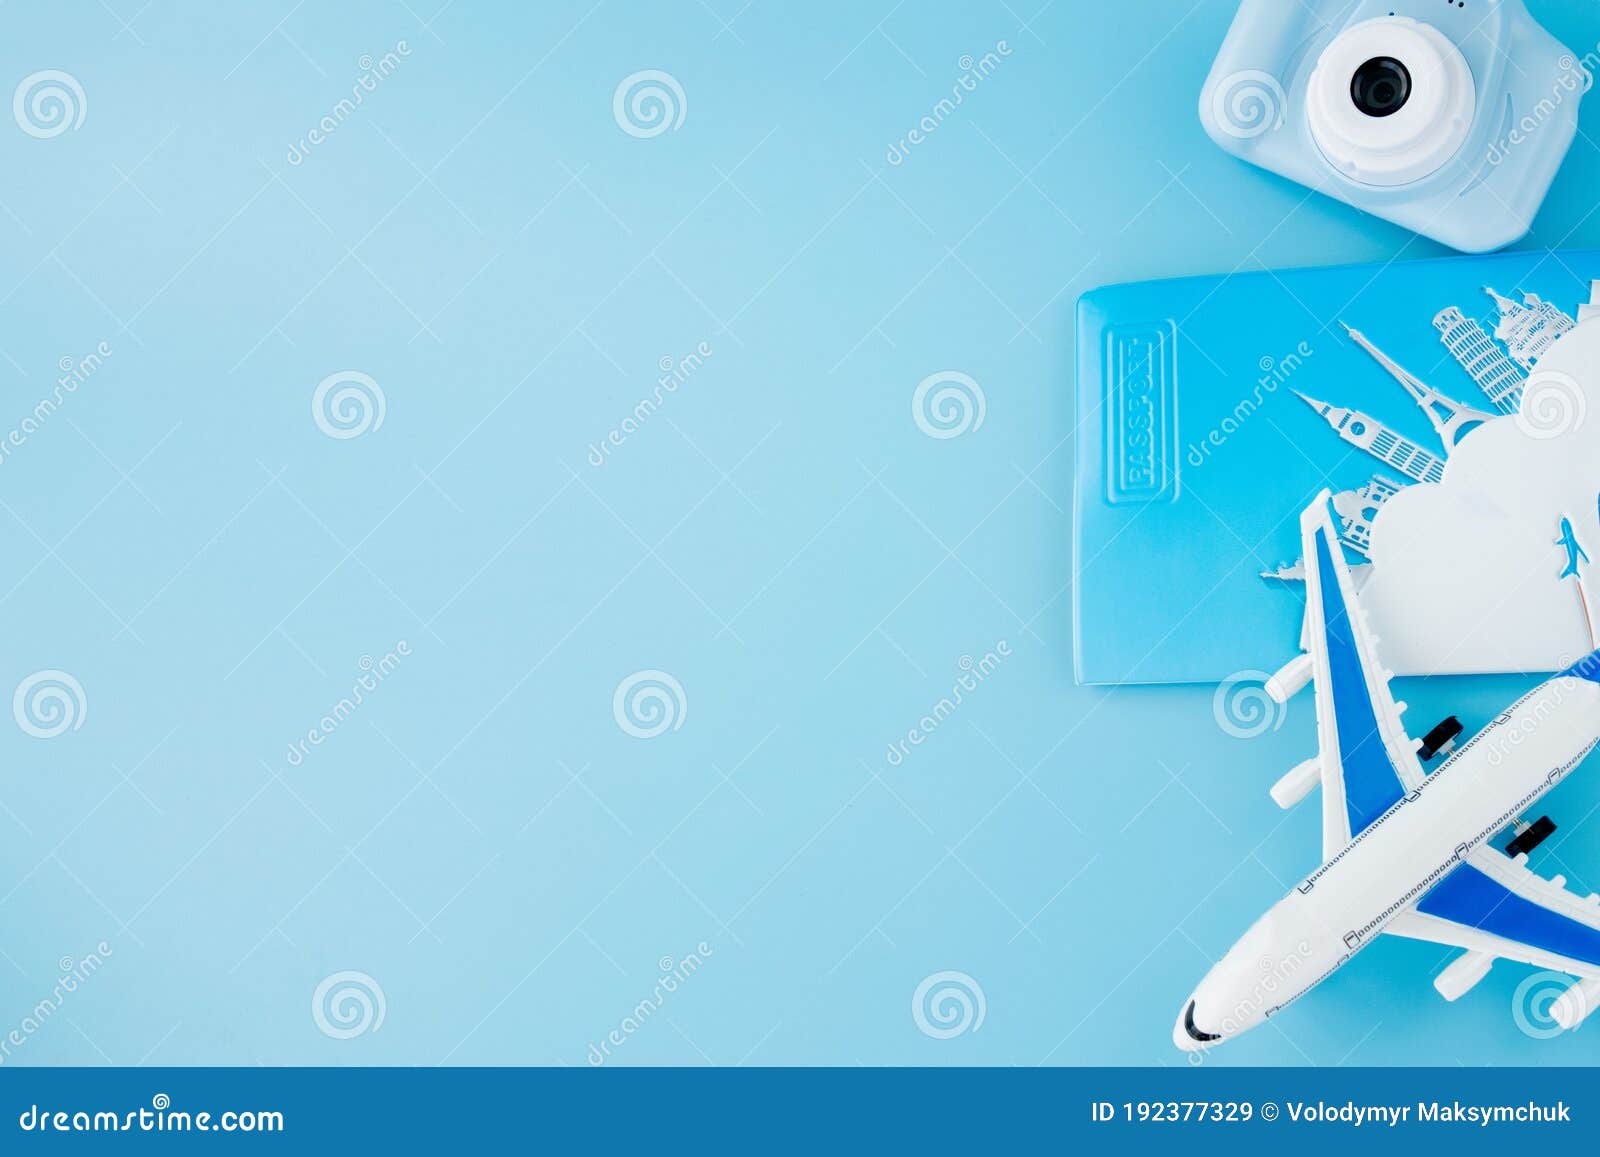 Camera, Passport and Airplane on Light Blue  or Vacation  Concept Stock Image - Image of airline, copy: 192377329